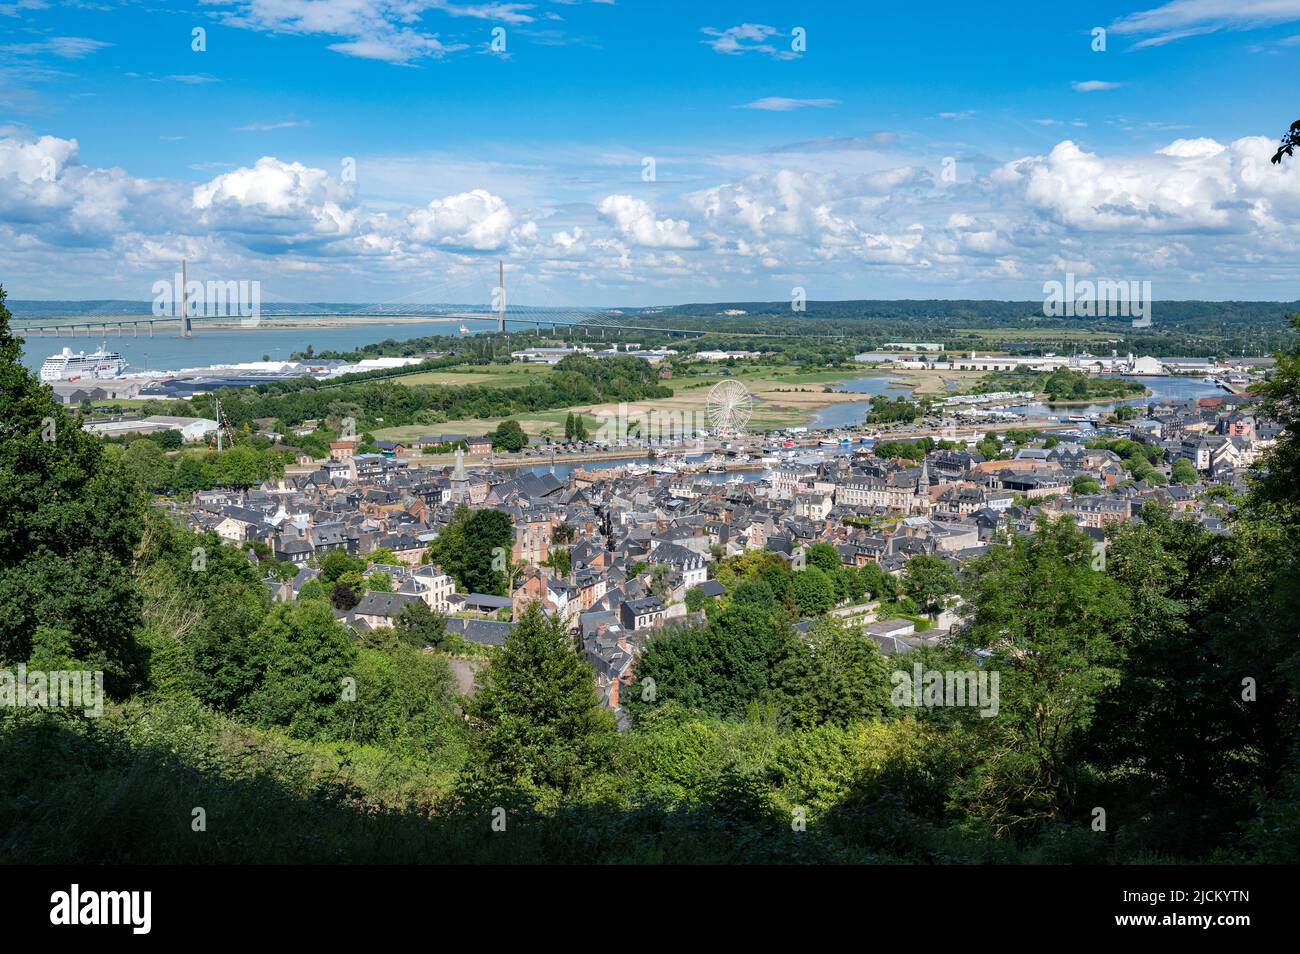 The view of Honfleur from the  panorama of Équemauville at Mont-Joli, a coastal hill next to Honfleur. Stock Photo